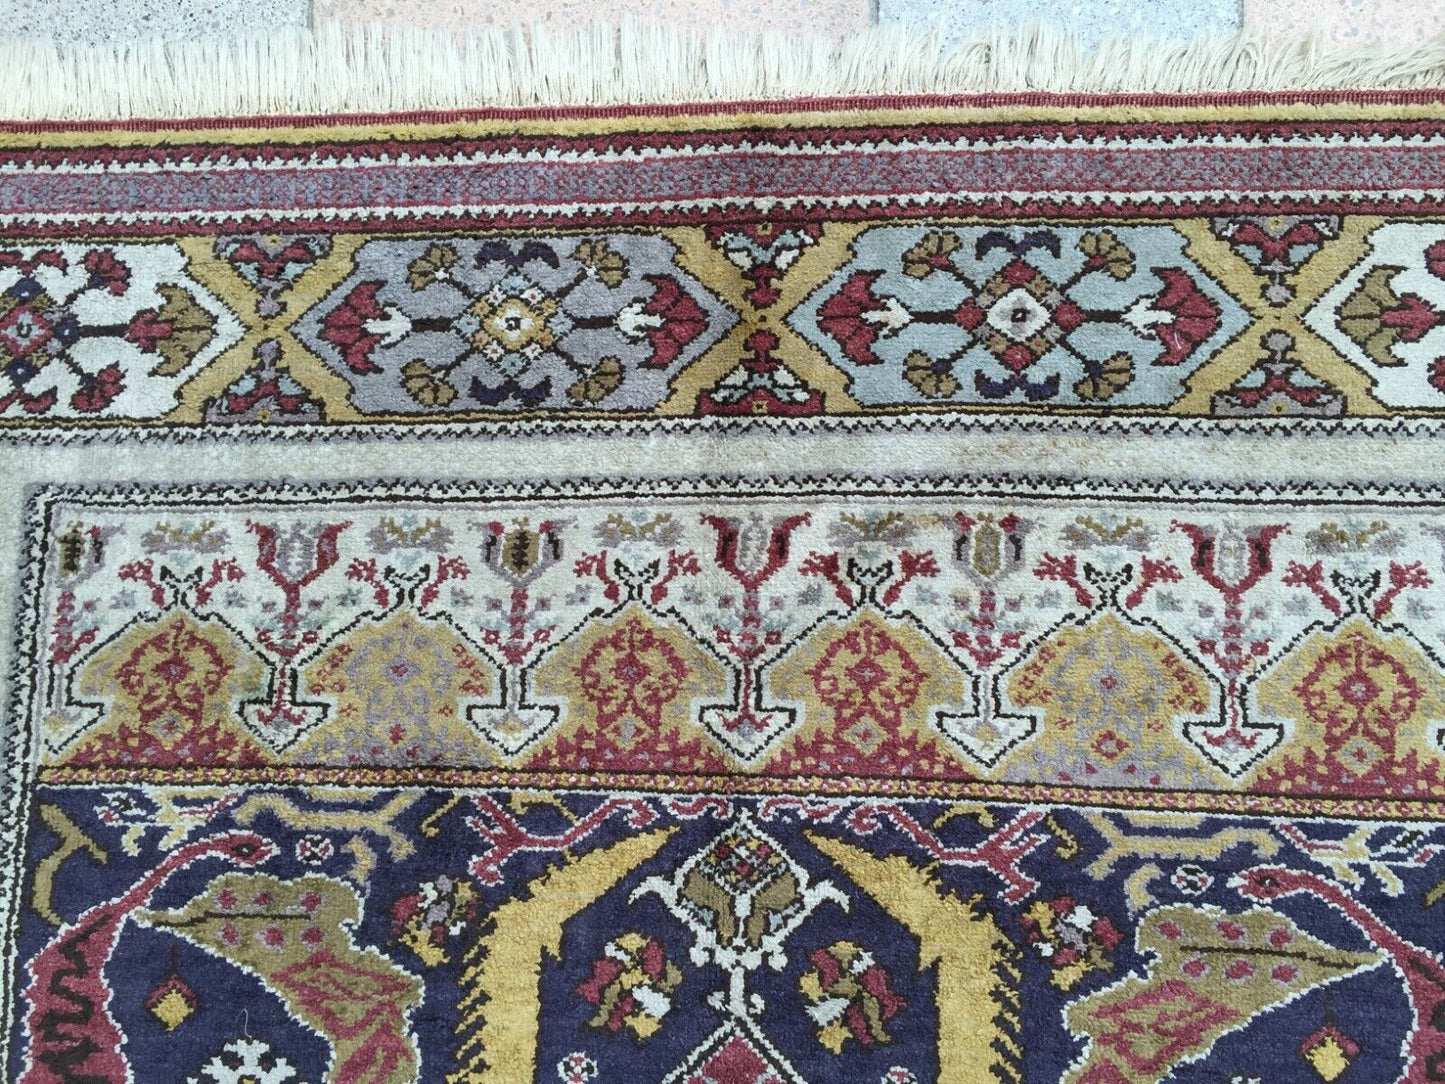 Artistic display of the rug on a floor, showcasing its cultural significance and vintage charm